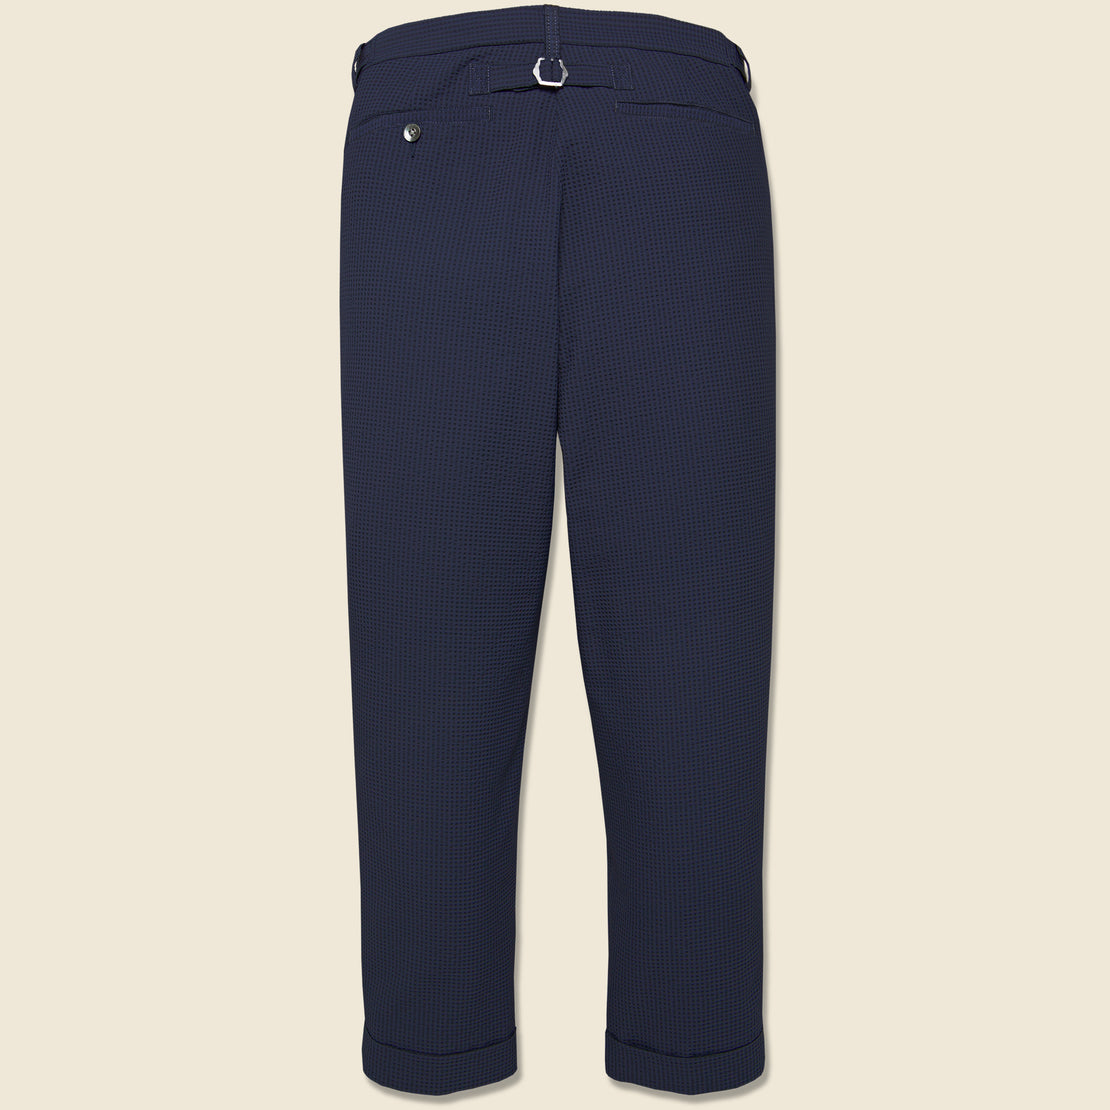 IVY Ankle-Cut Seersucker Trousers - Navy - BEAMS+ - STAG Provisions - Suiting - Suit Pant